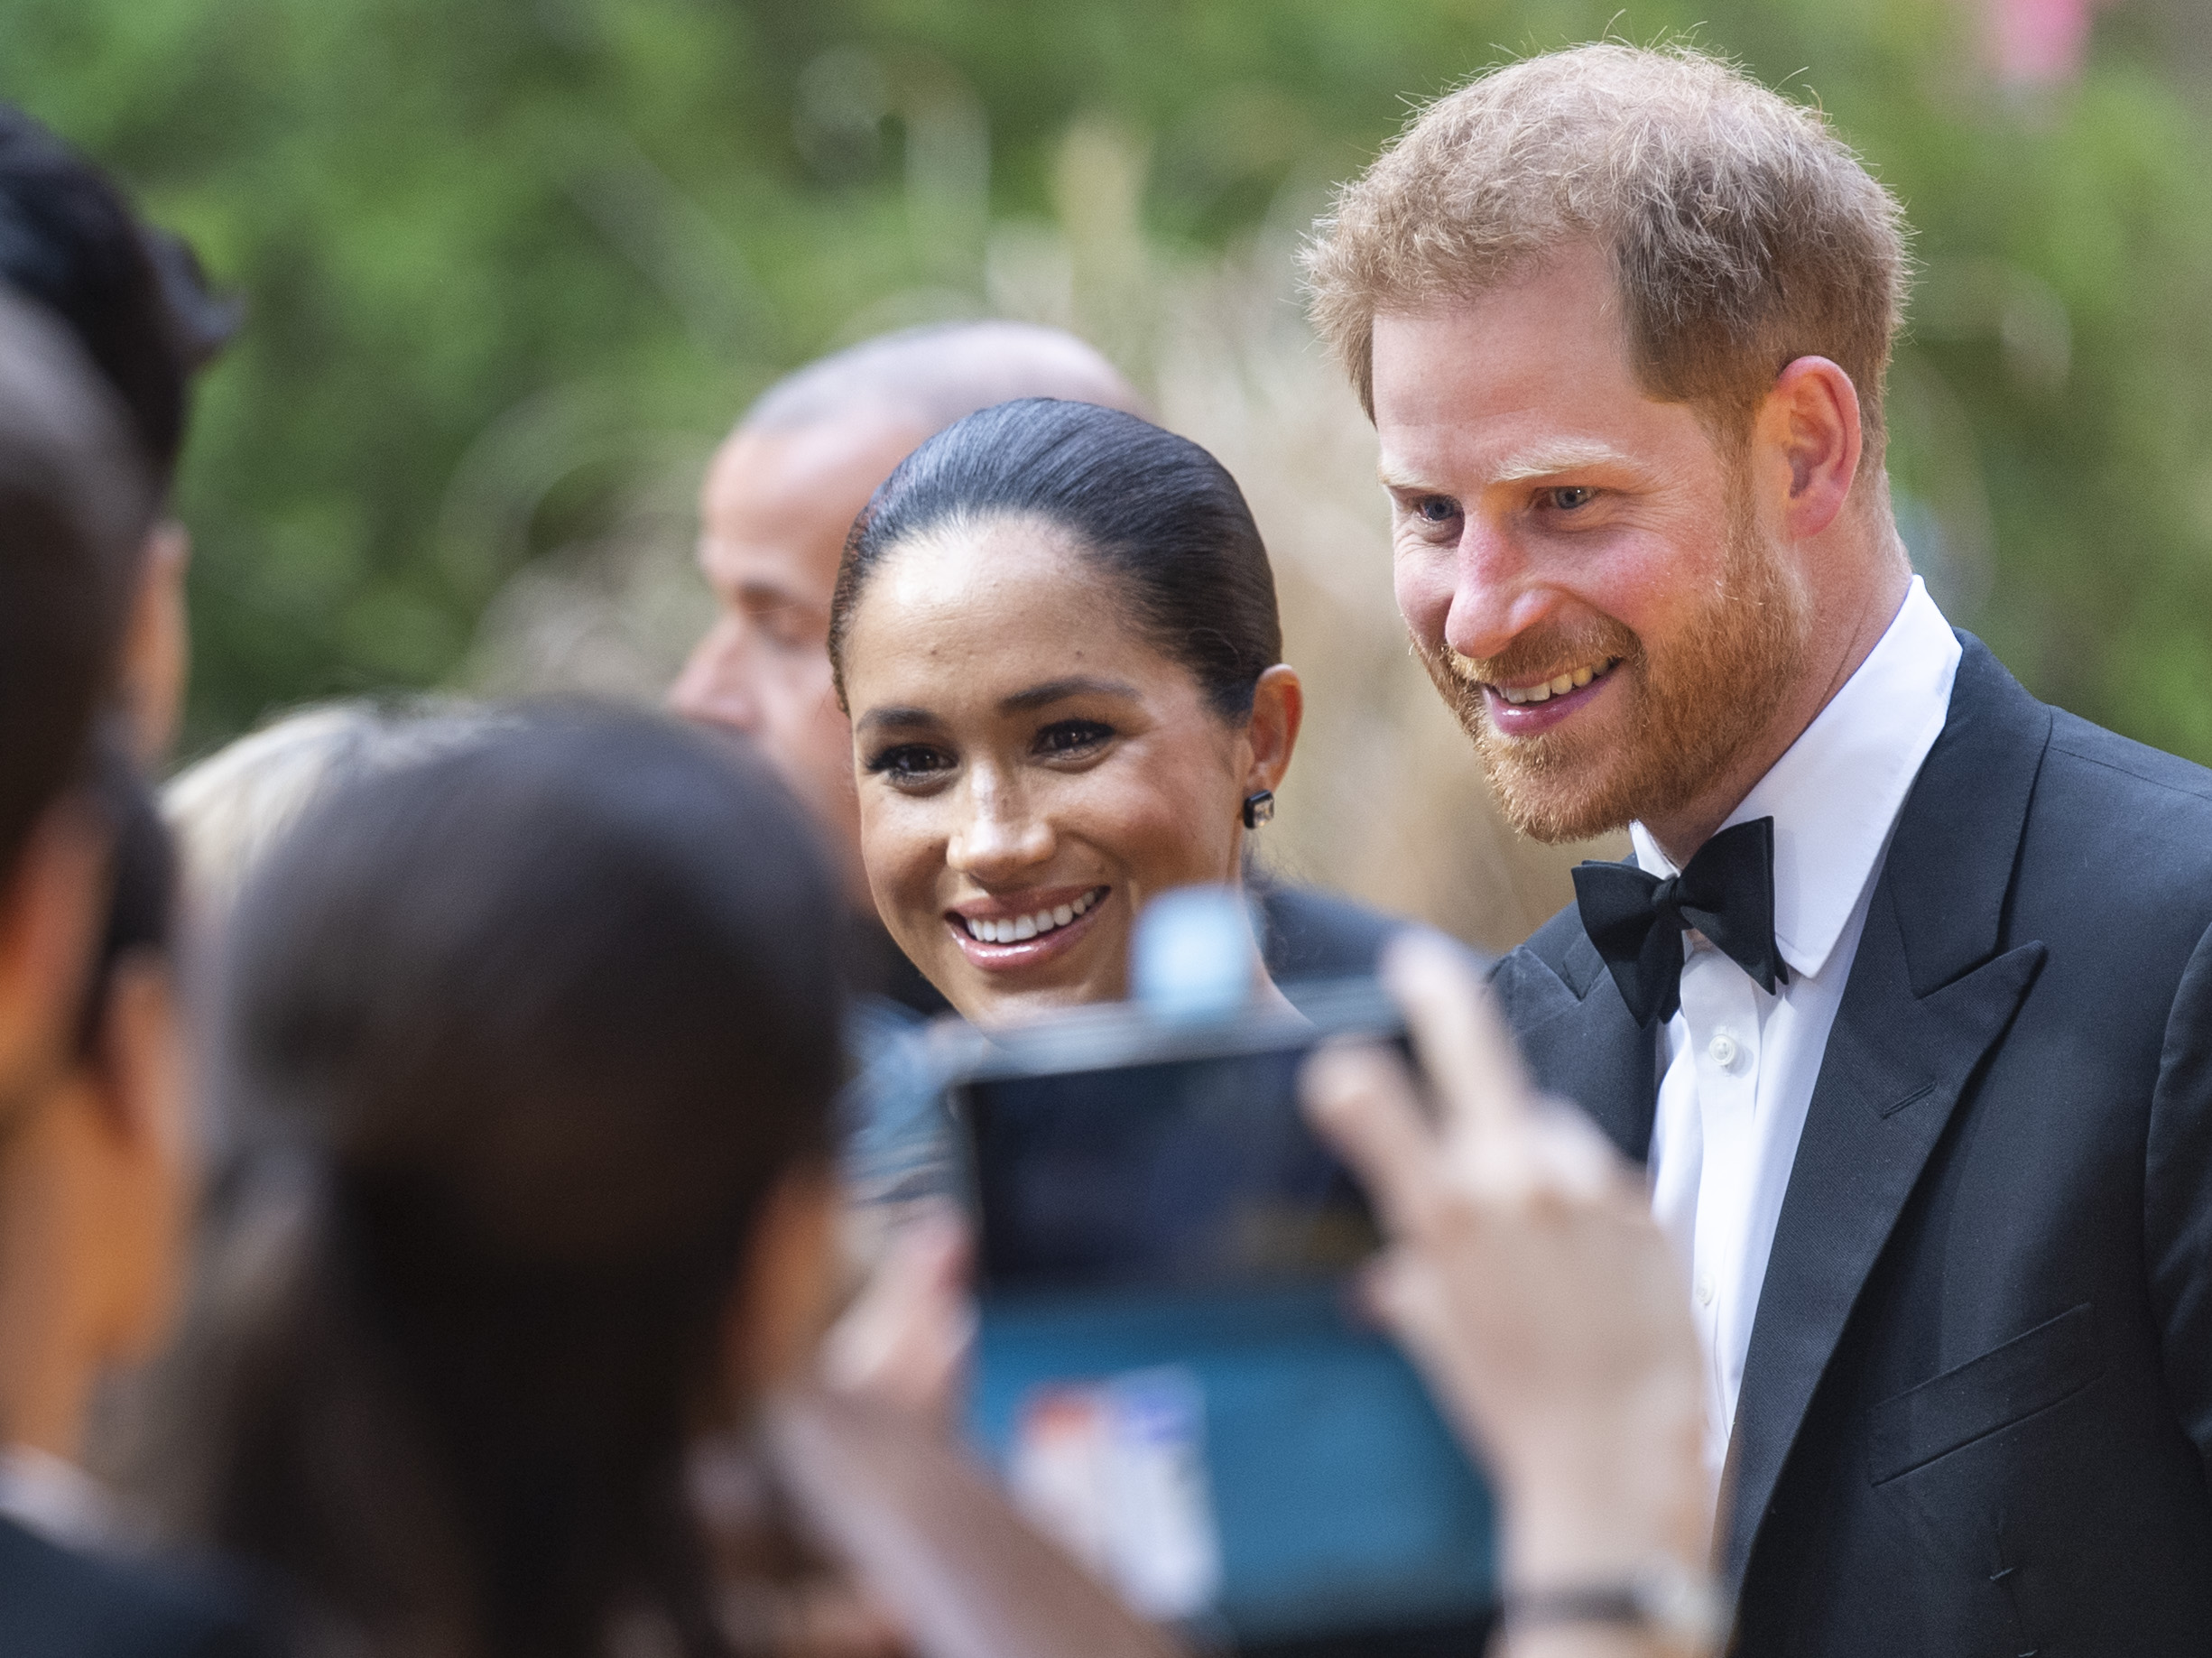 Prince Harry, Duke of Sussex and Meghan, Duchess of Sussex attend "The Lion King" European Premiere on July 14, 2019 in London, England. (Mark Cuthbert&mdash;UK Press via Getty Images)